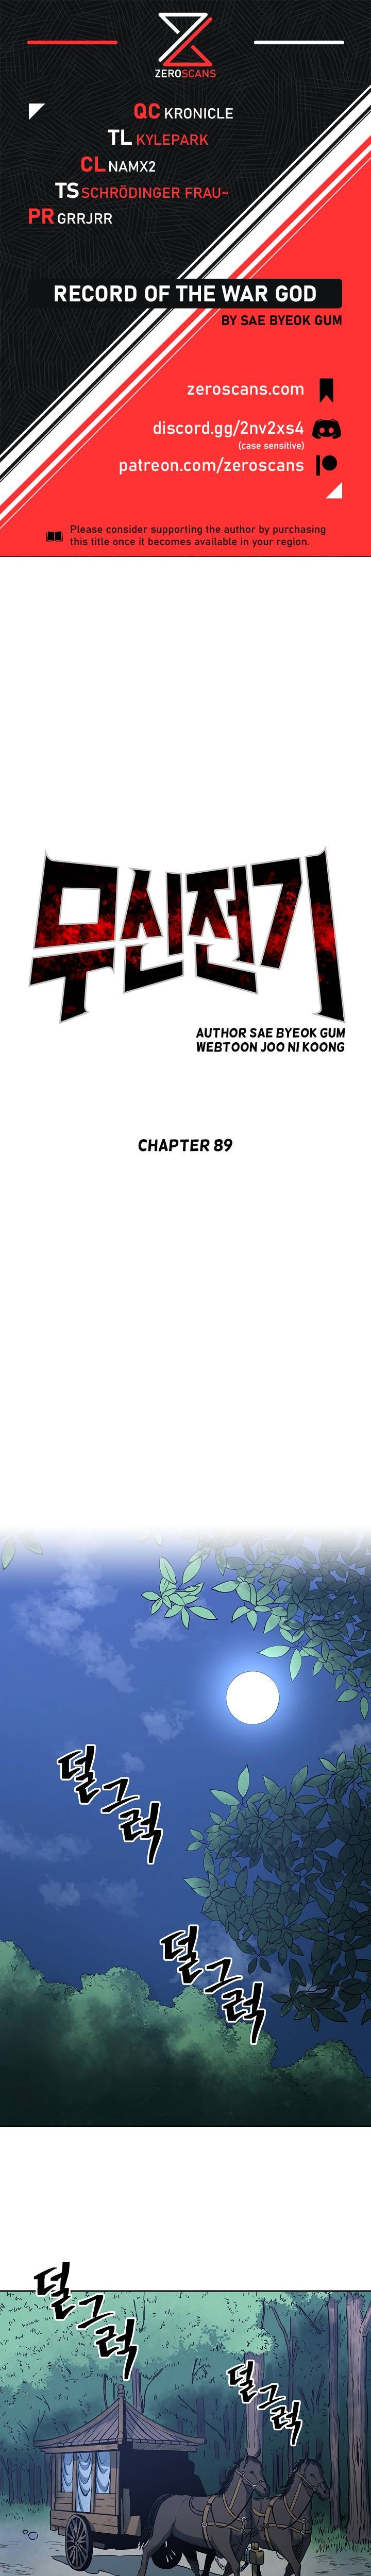 record-of-the-war-god-chap-89-0